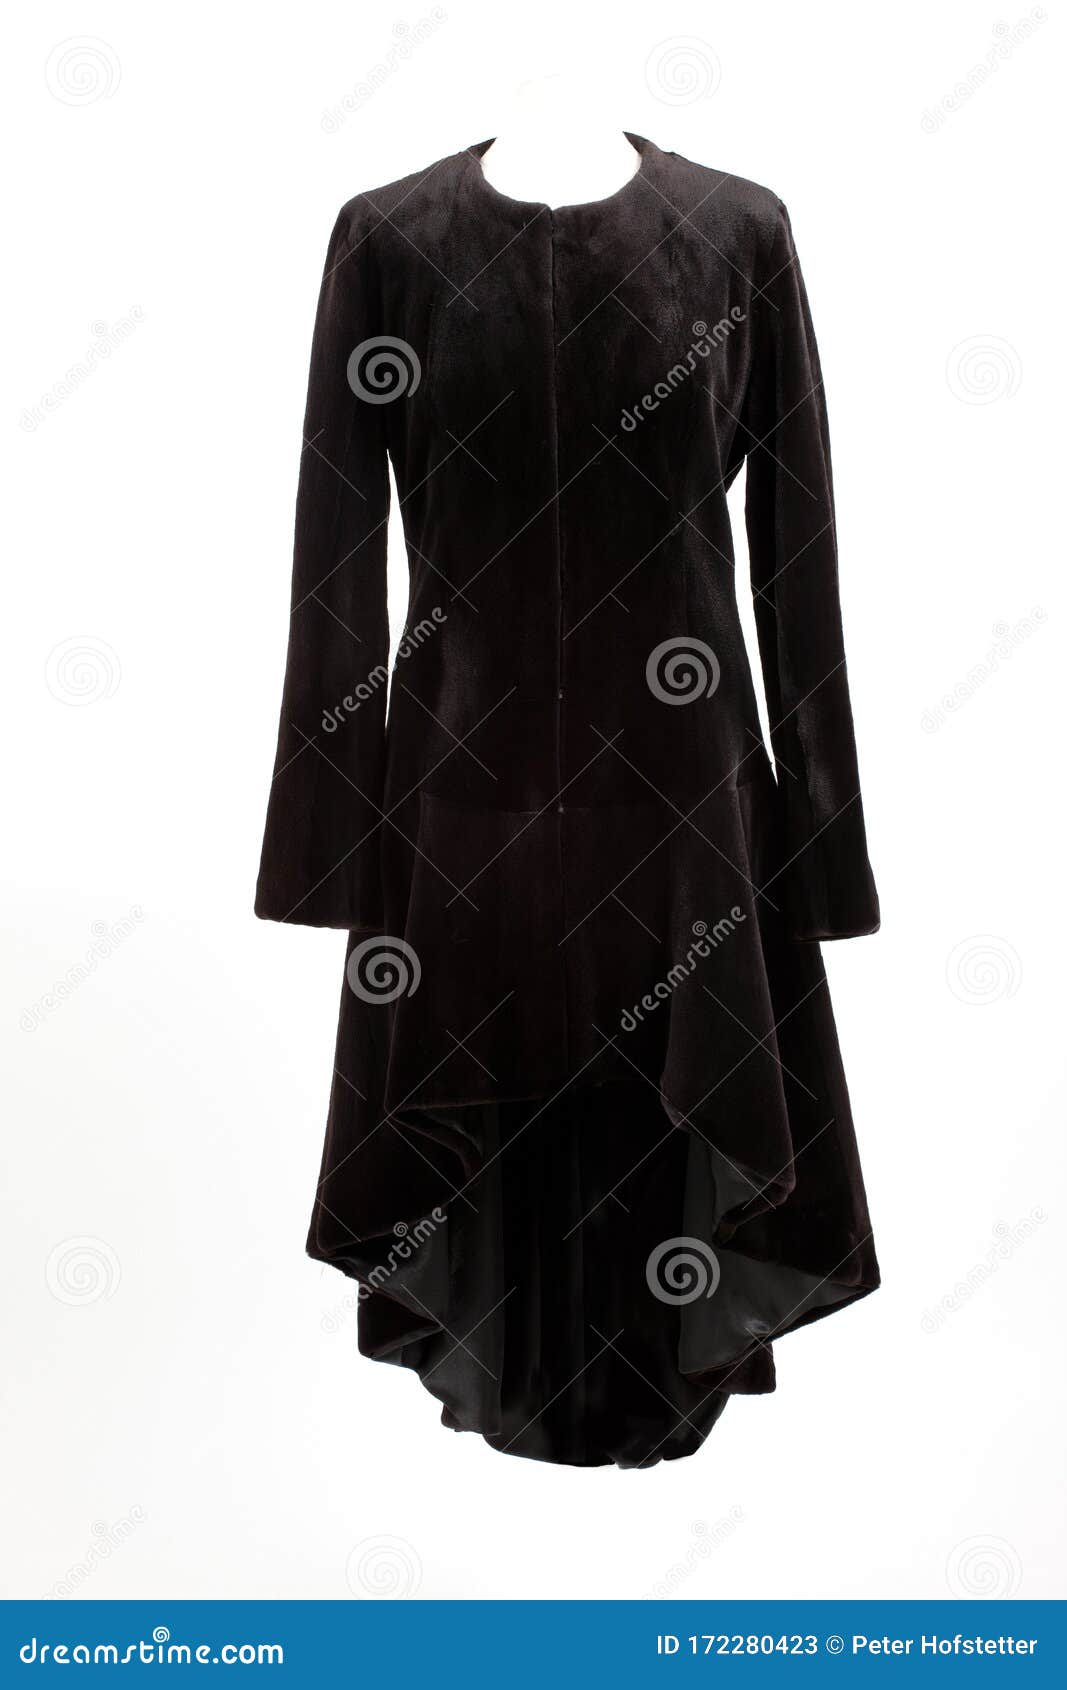 Expensive Fur Coats Collection on a Mannequin Stock Image - Image of ...